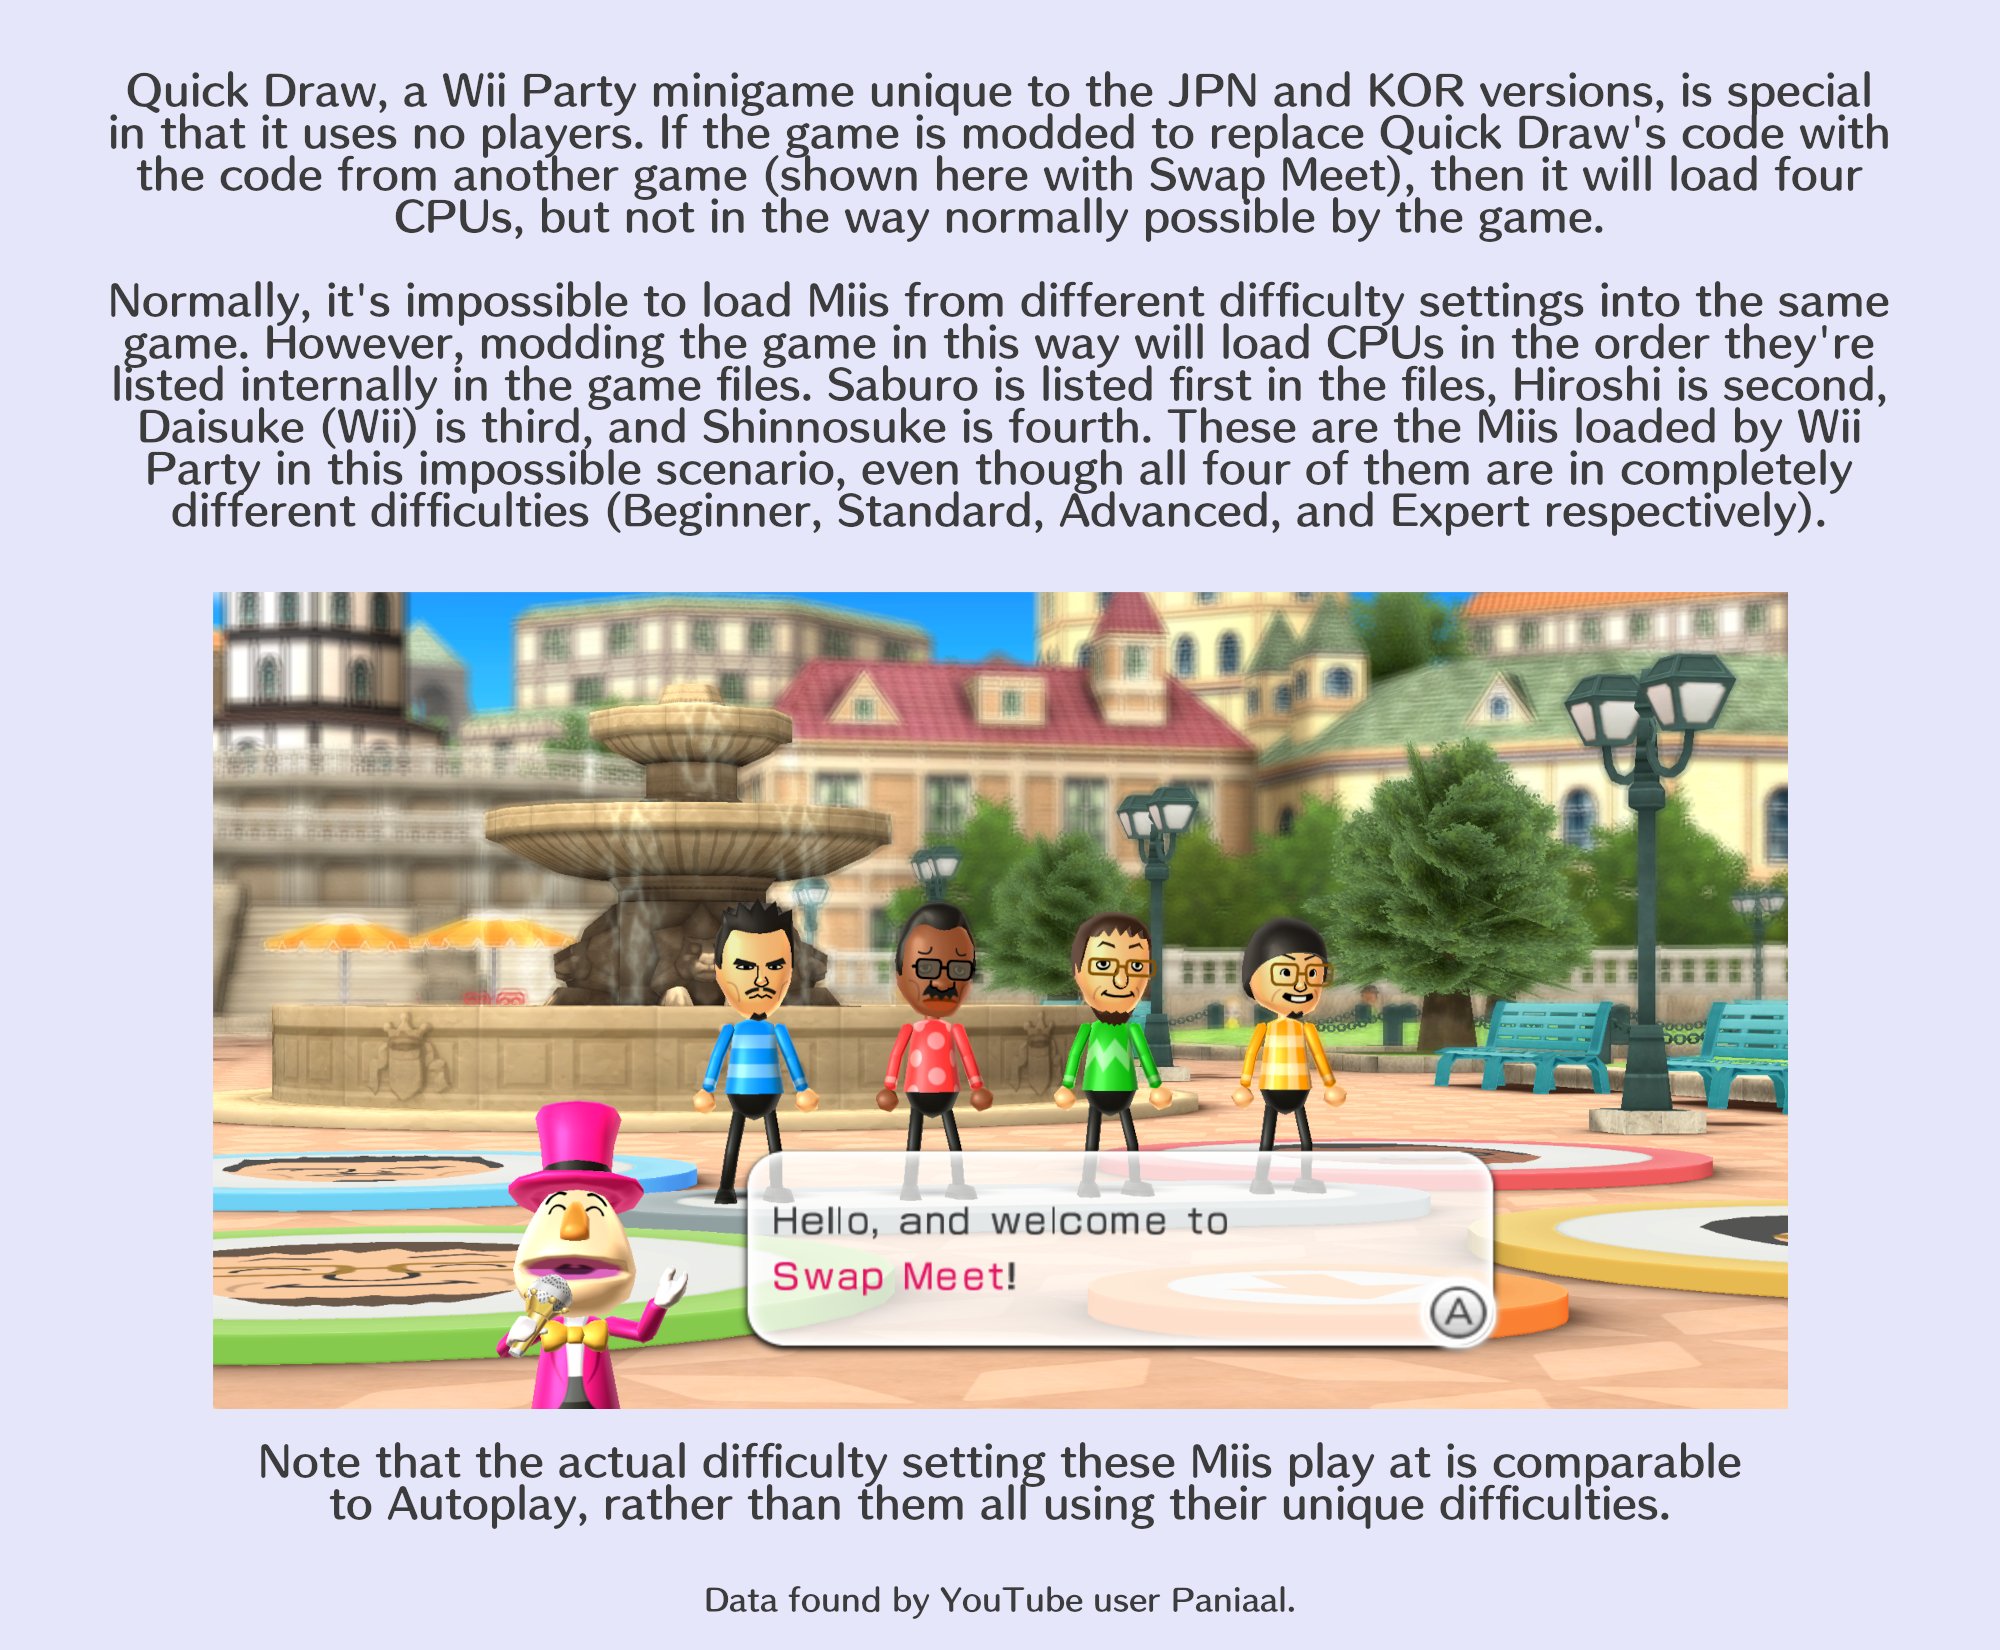 Wii Facts Plus on Twitter: "By modding Wii Party to load a minigame over  Quick Draw (a JPN/KOR exclusive minigame), the Miis it automatically loads  are from different difficulty settings, something normally